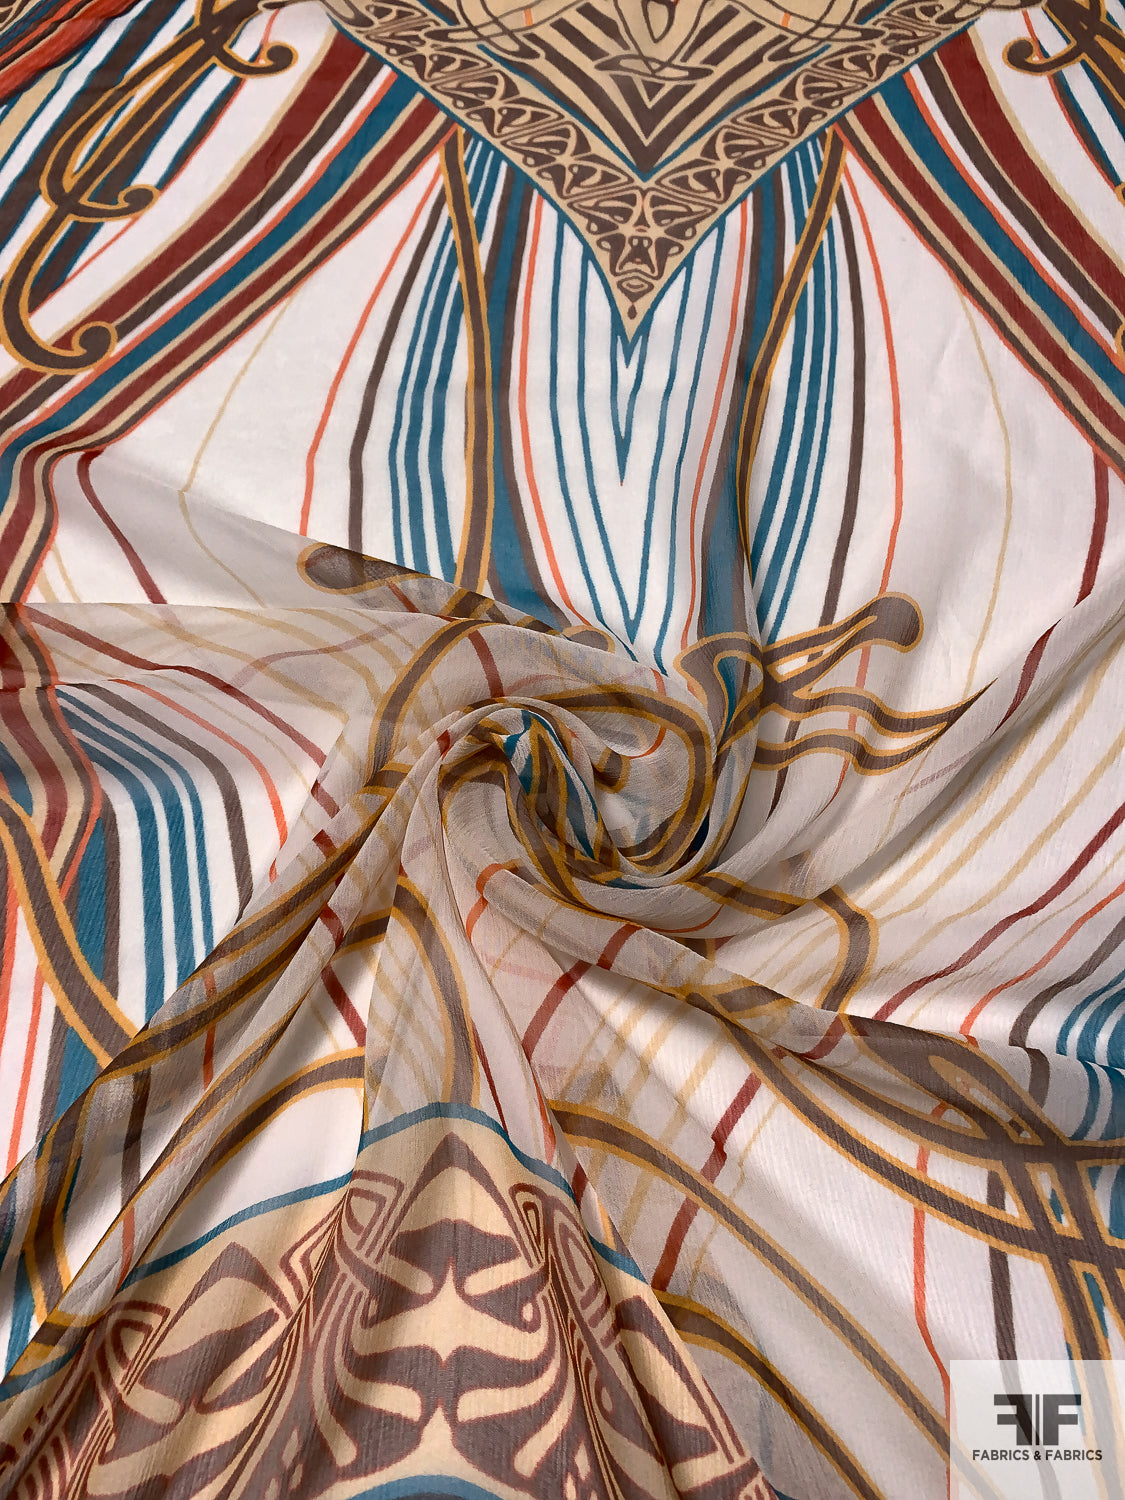 Exotic Printed Slightly Crinkled Silk Chiffon Panel - Cream / Turquoise / Brown / Black / Off-White